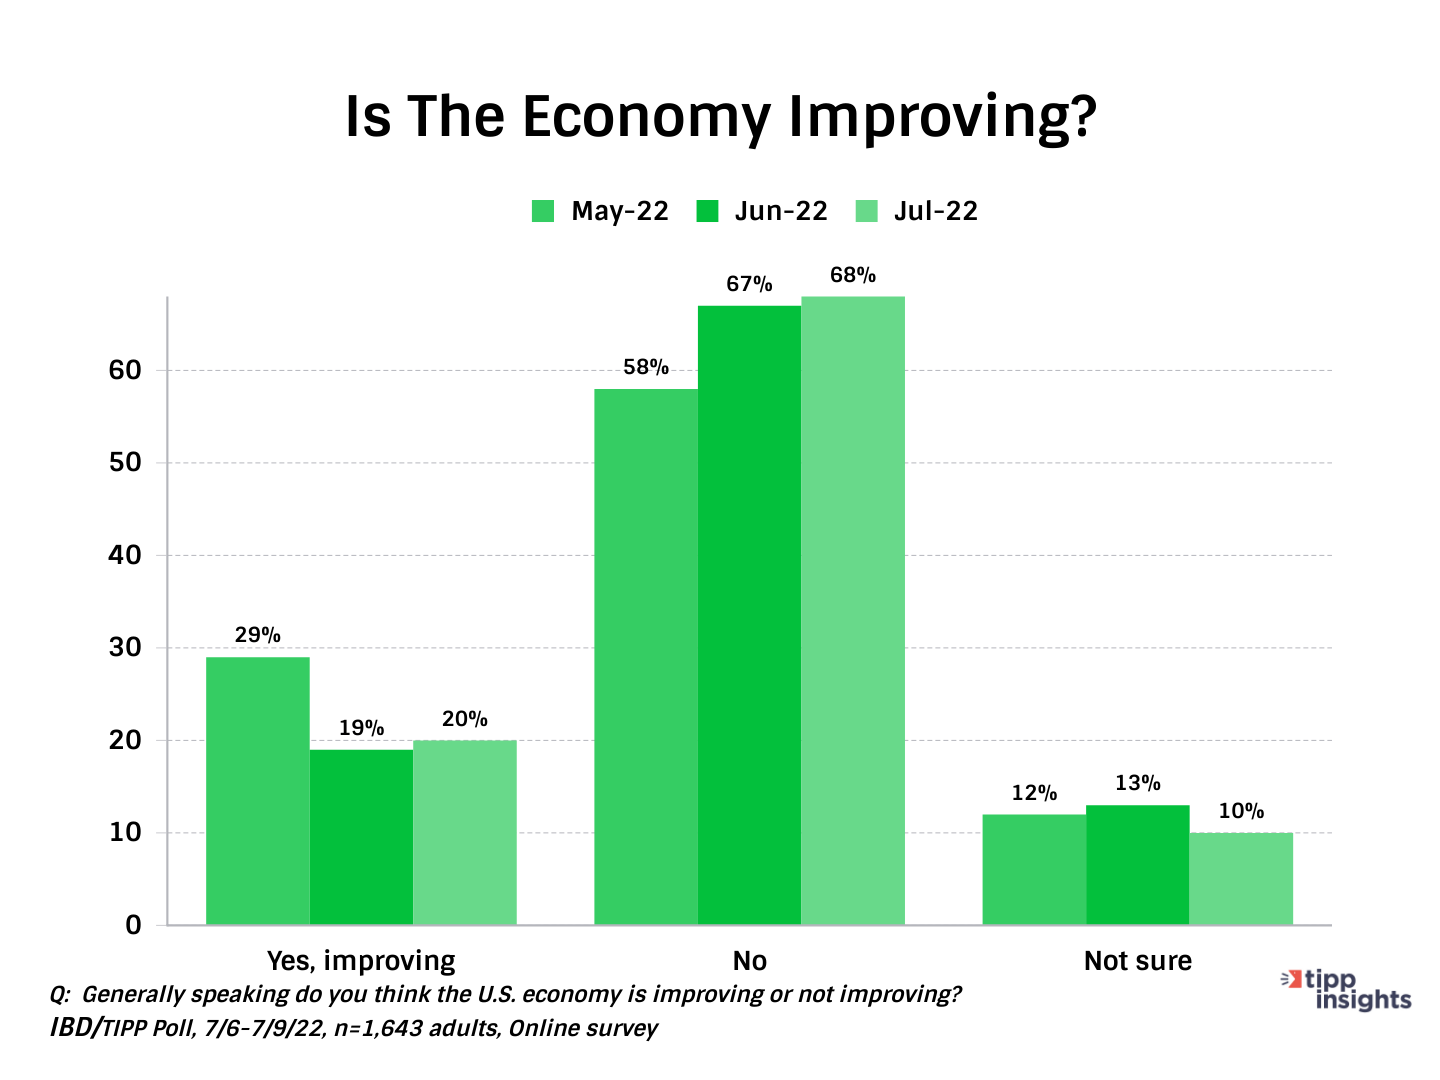 IBD/TIPP Poll results: Do Americans think the economy is improving?